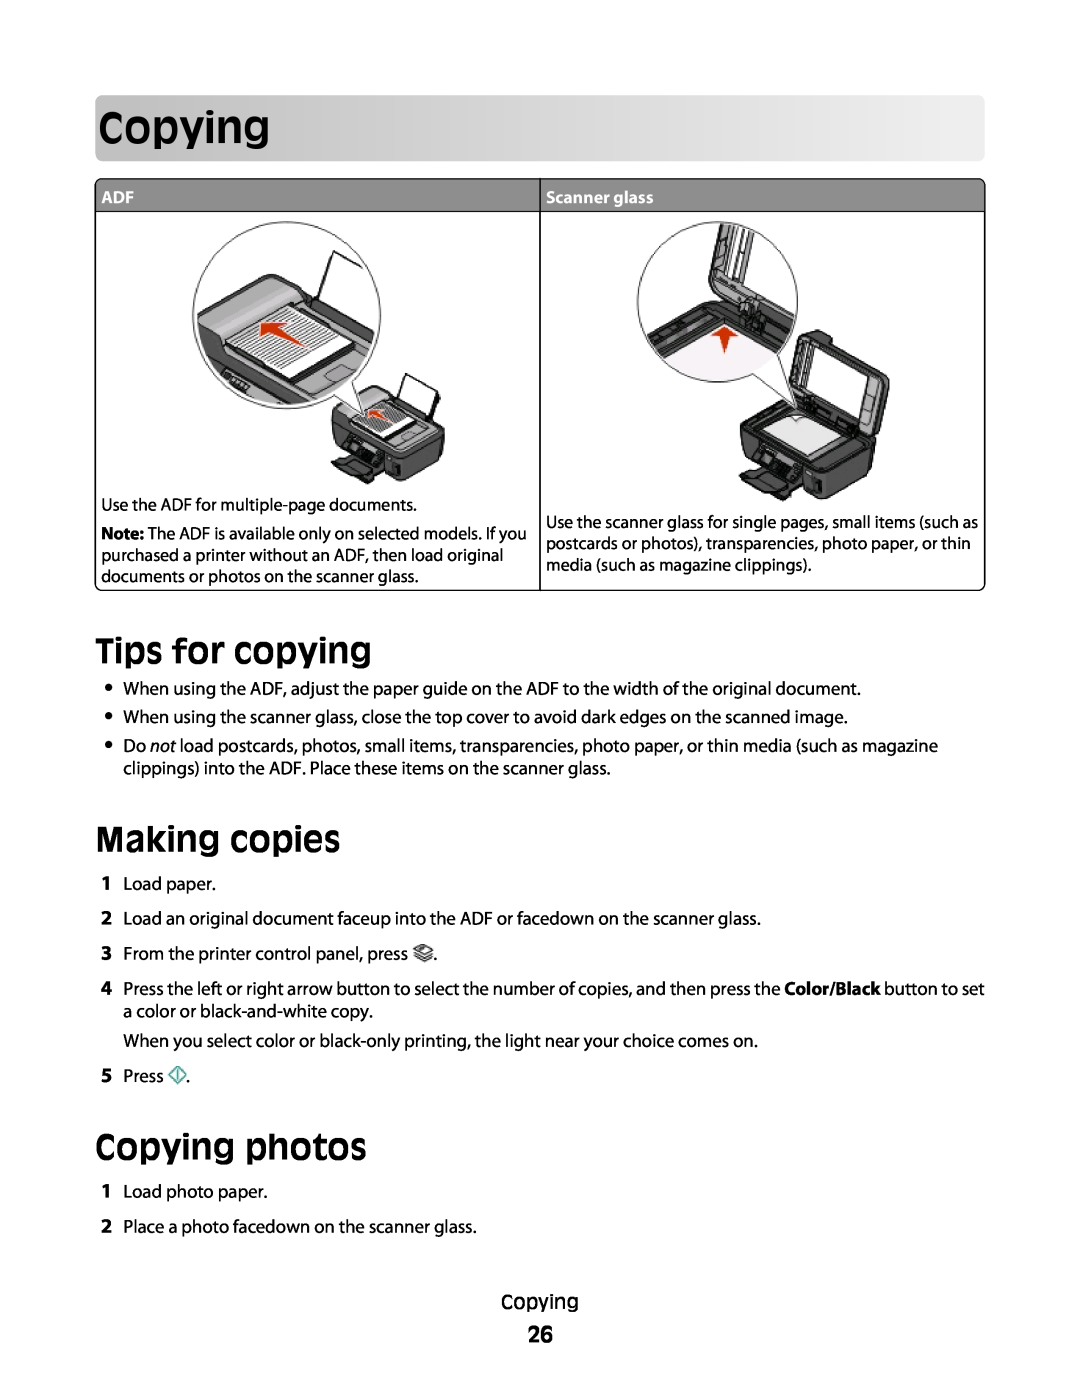 Lexmark Pro207, Pro208, Pro205 manual Tips for copying, Making copies, Copying photos 